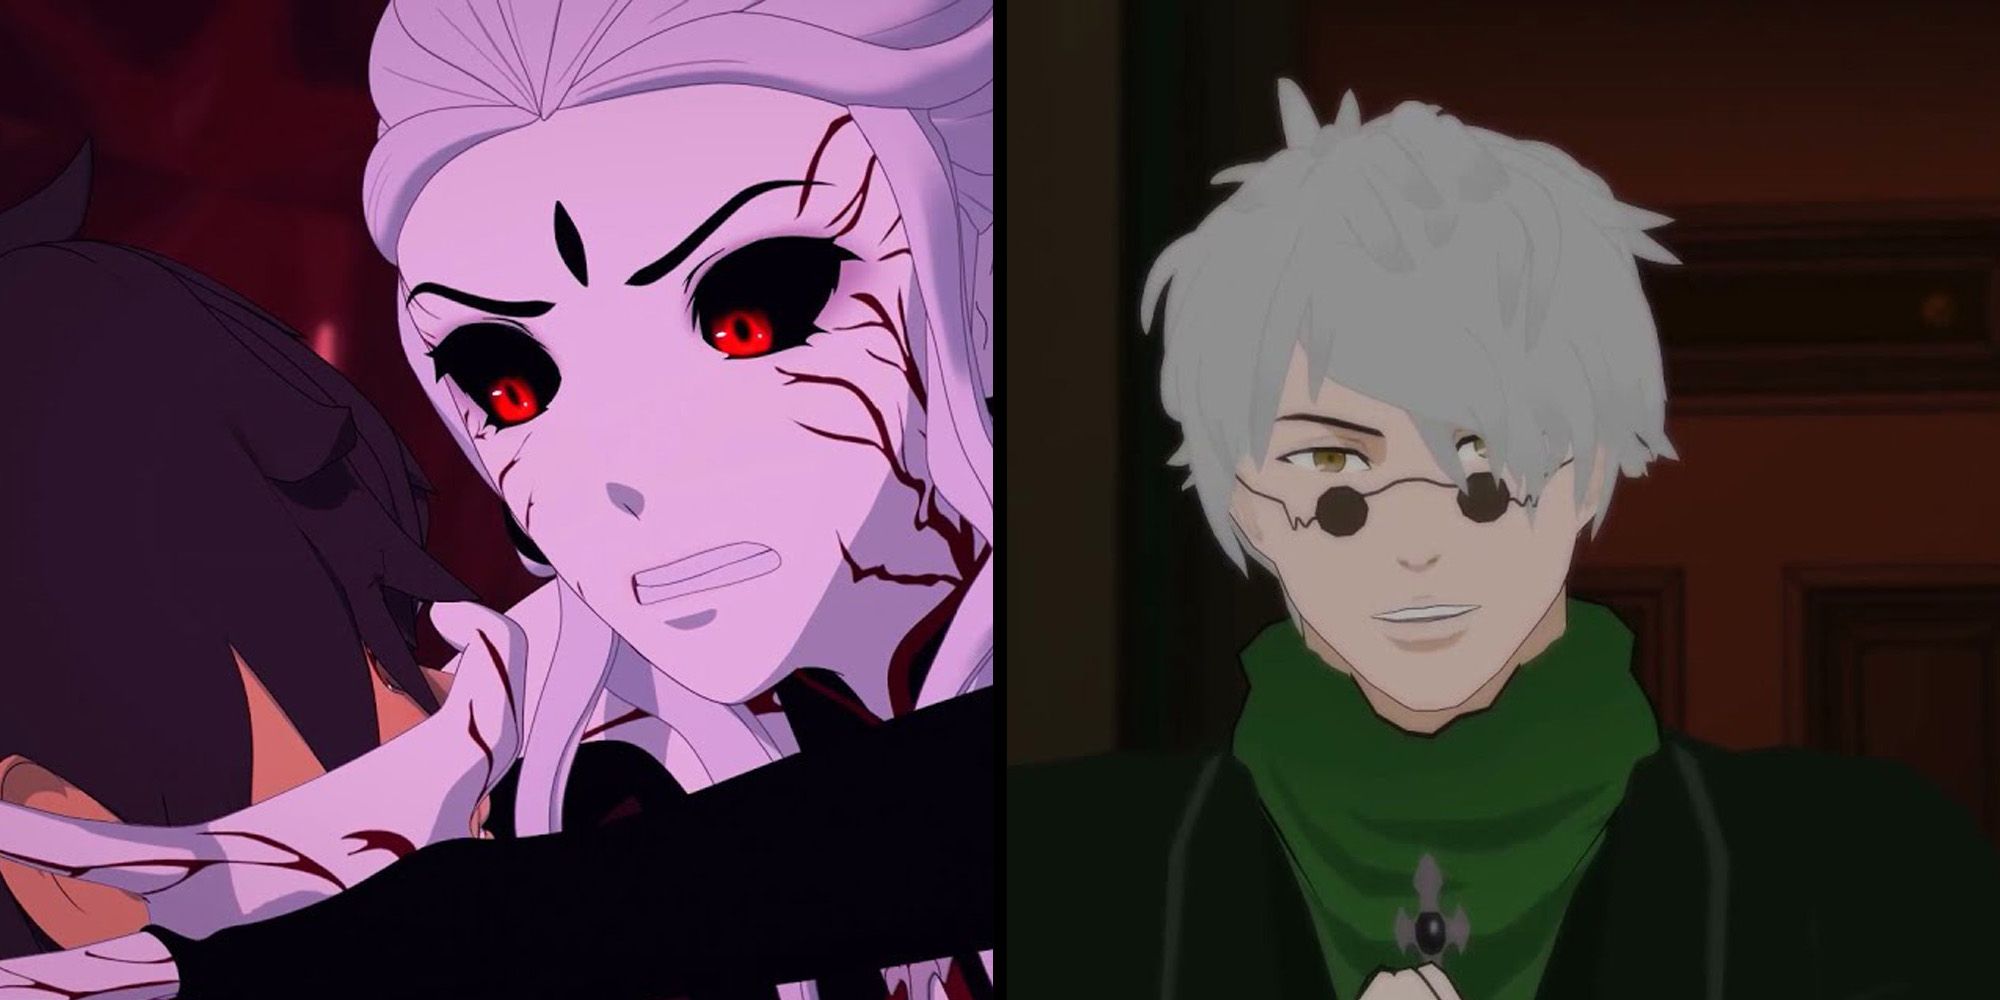 Strongest being from the Holy Shonen Trinity that Team RWBY can